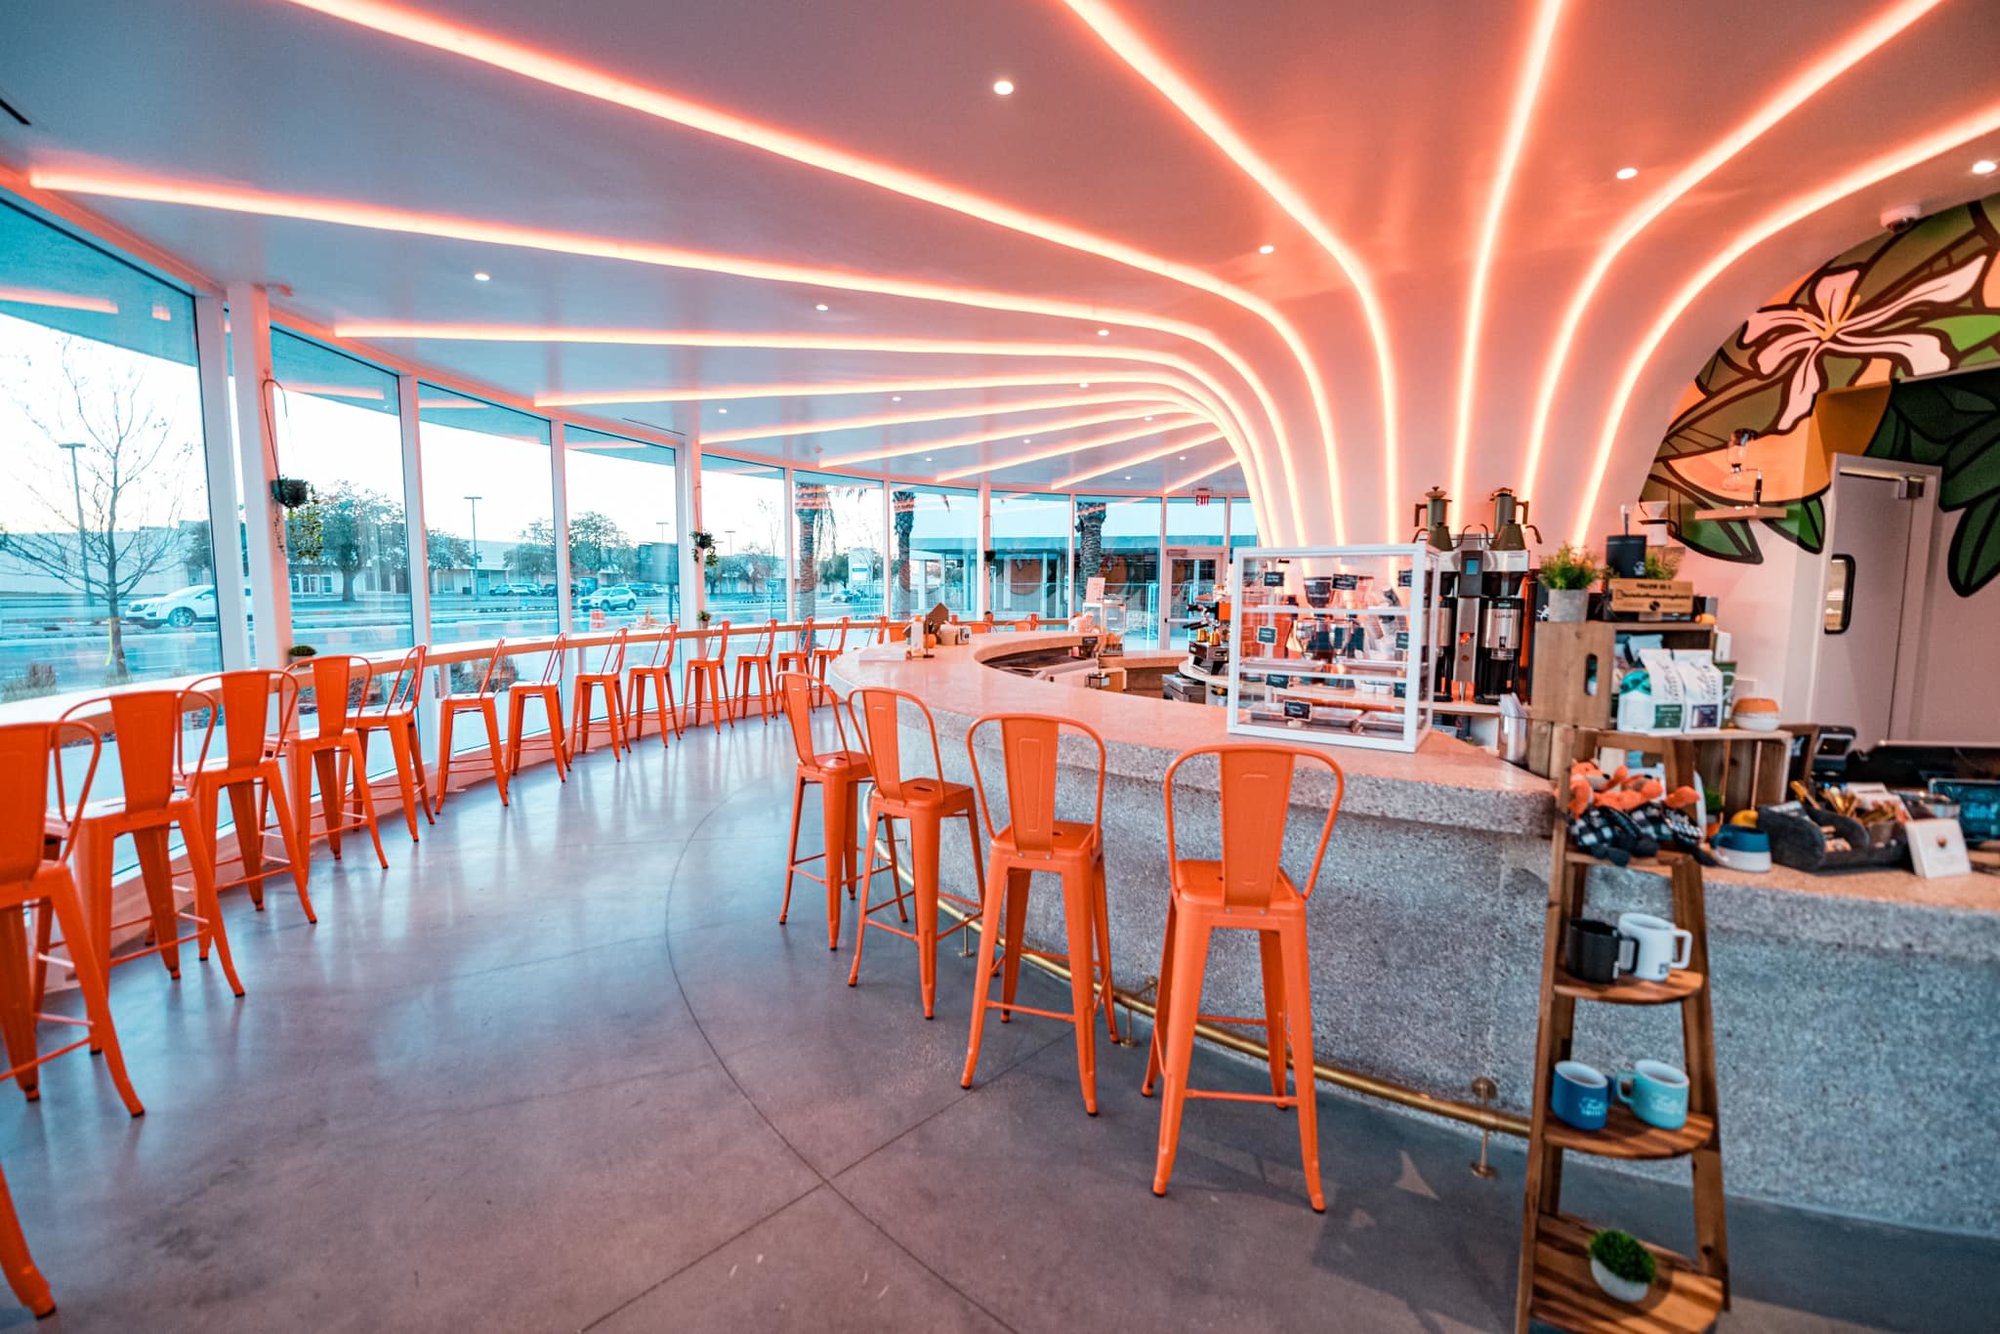 inside of the juice stand building with orange chairs and glass walls